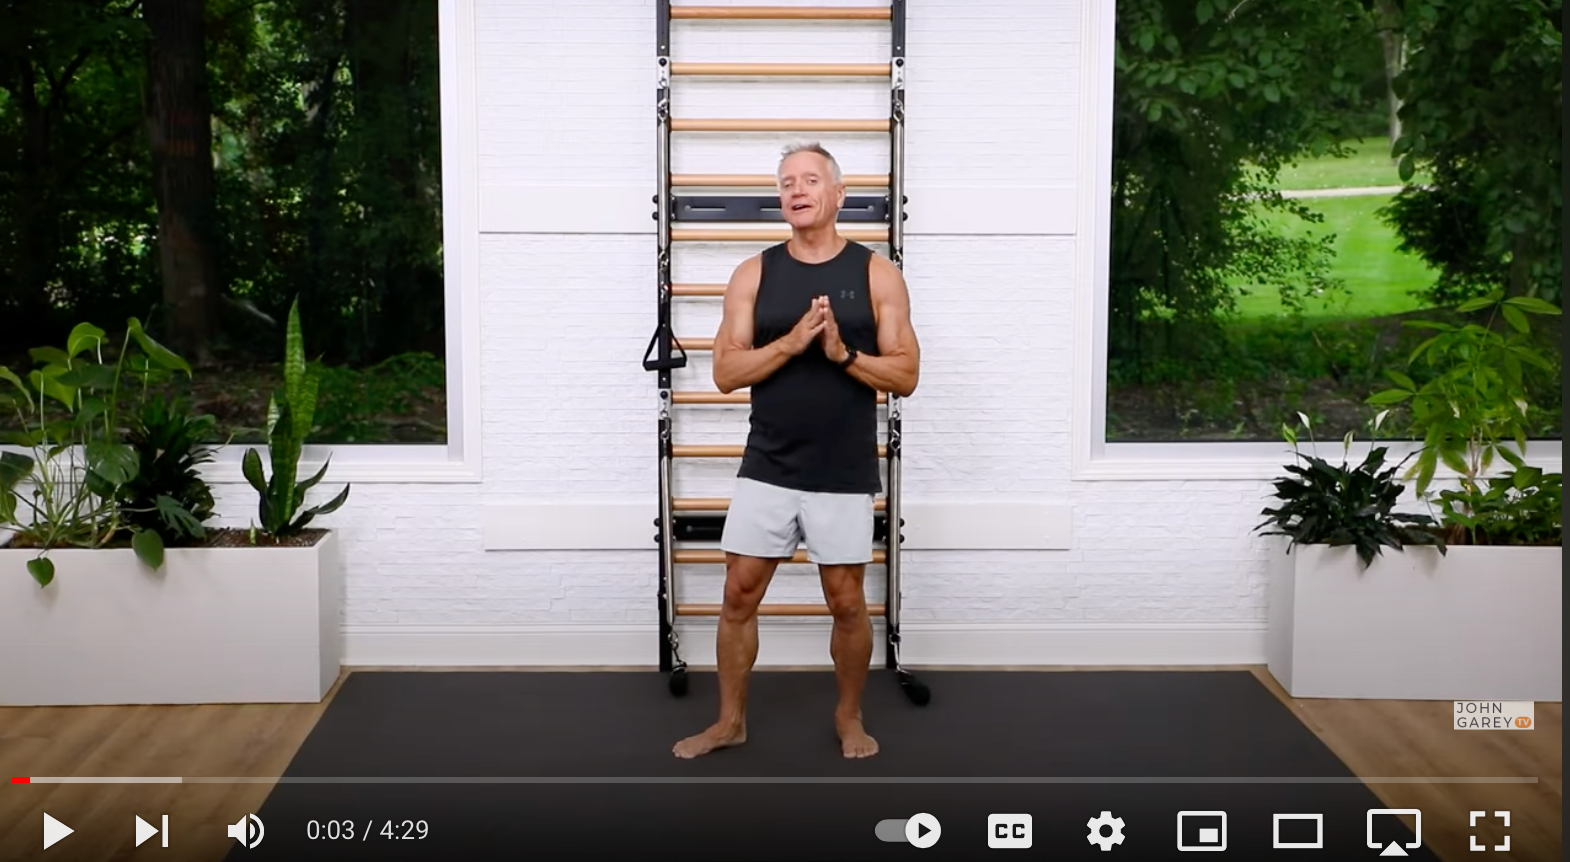 John Garey Pilates classes online with the Fuse Ladder